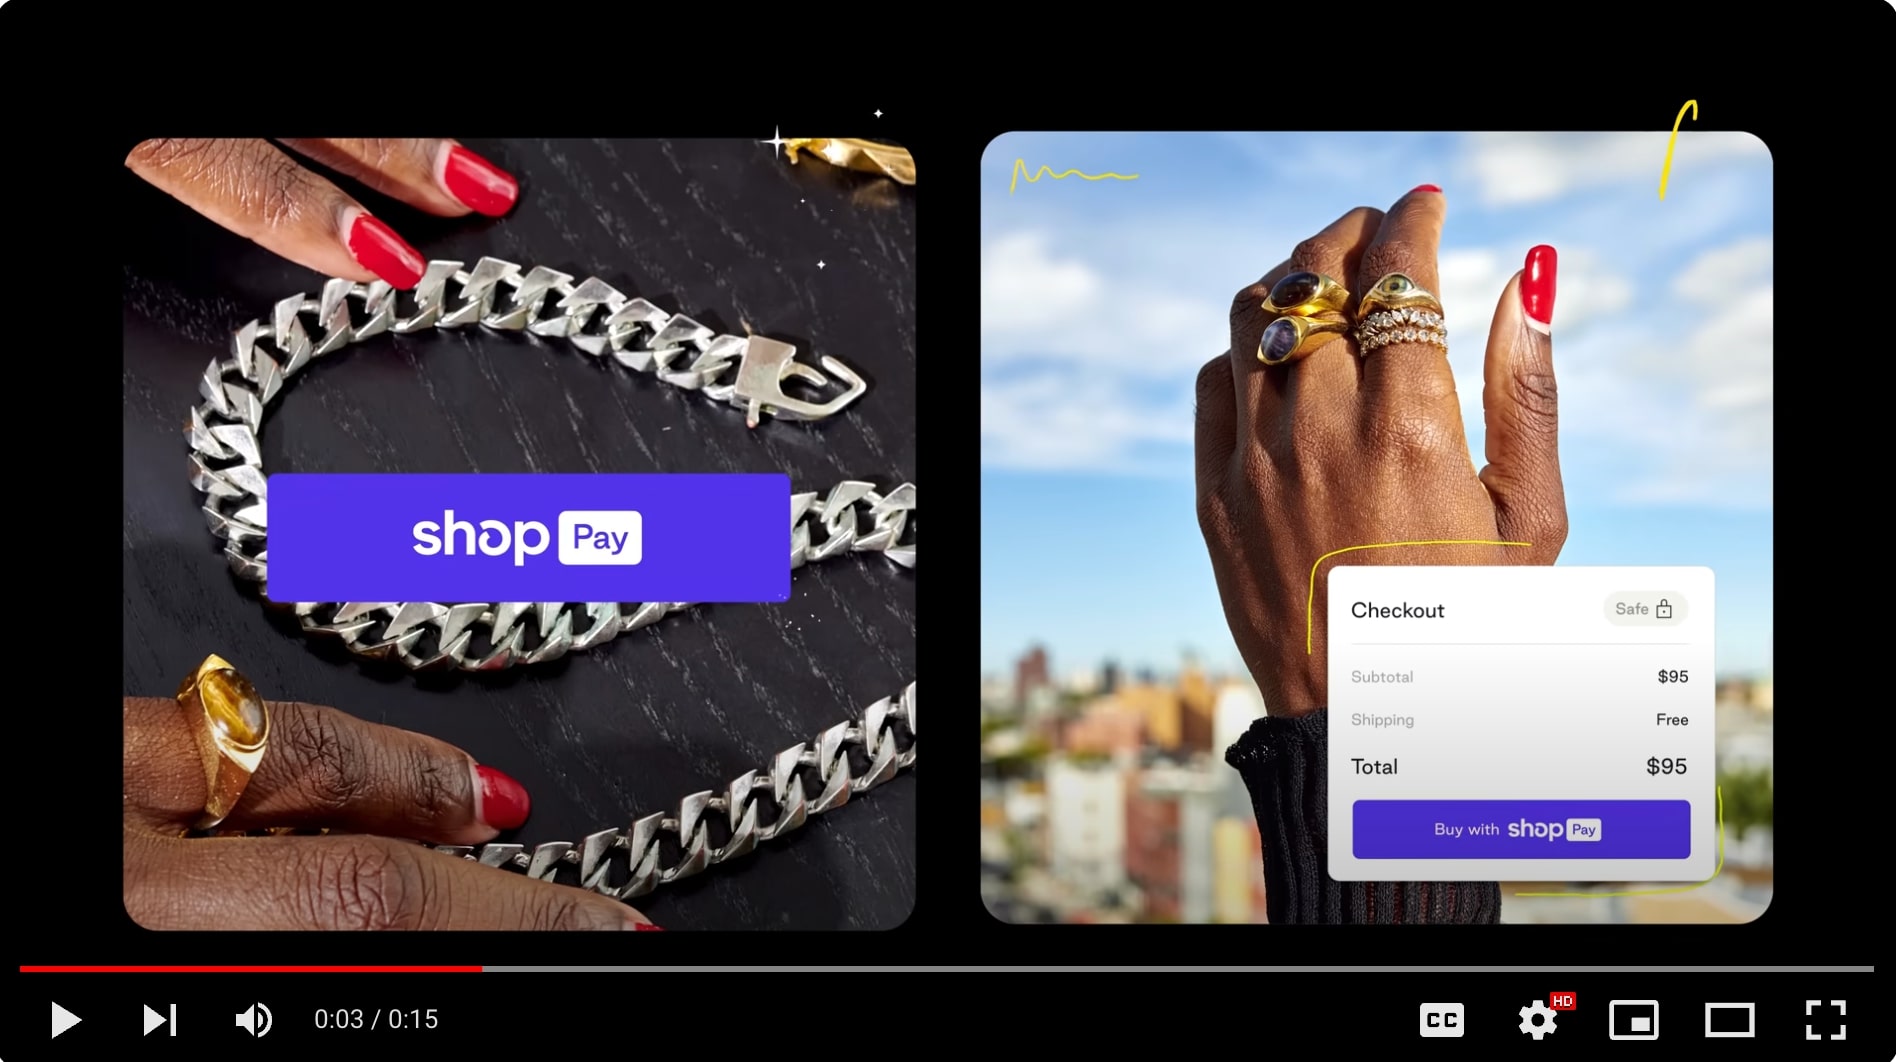 Shopify's video ad introducing the "shopPay" checkout option